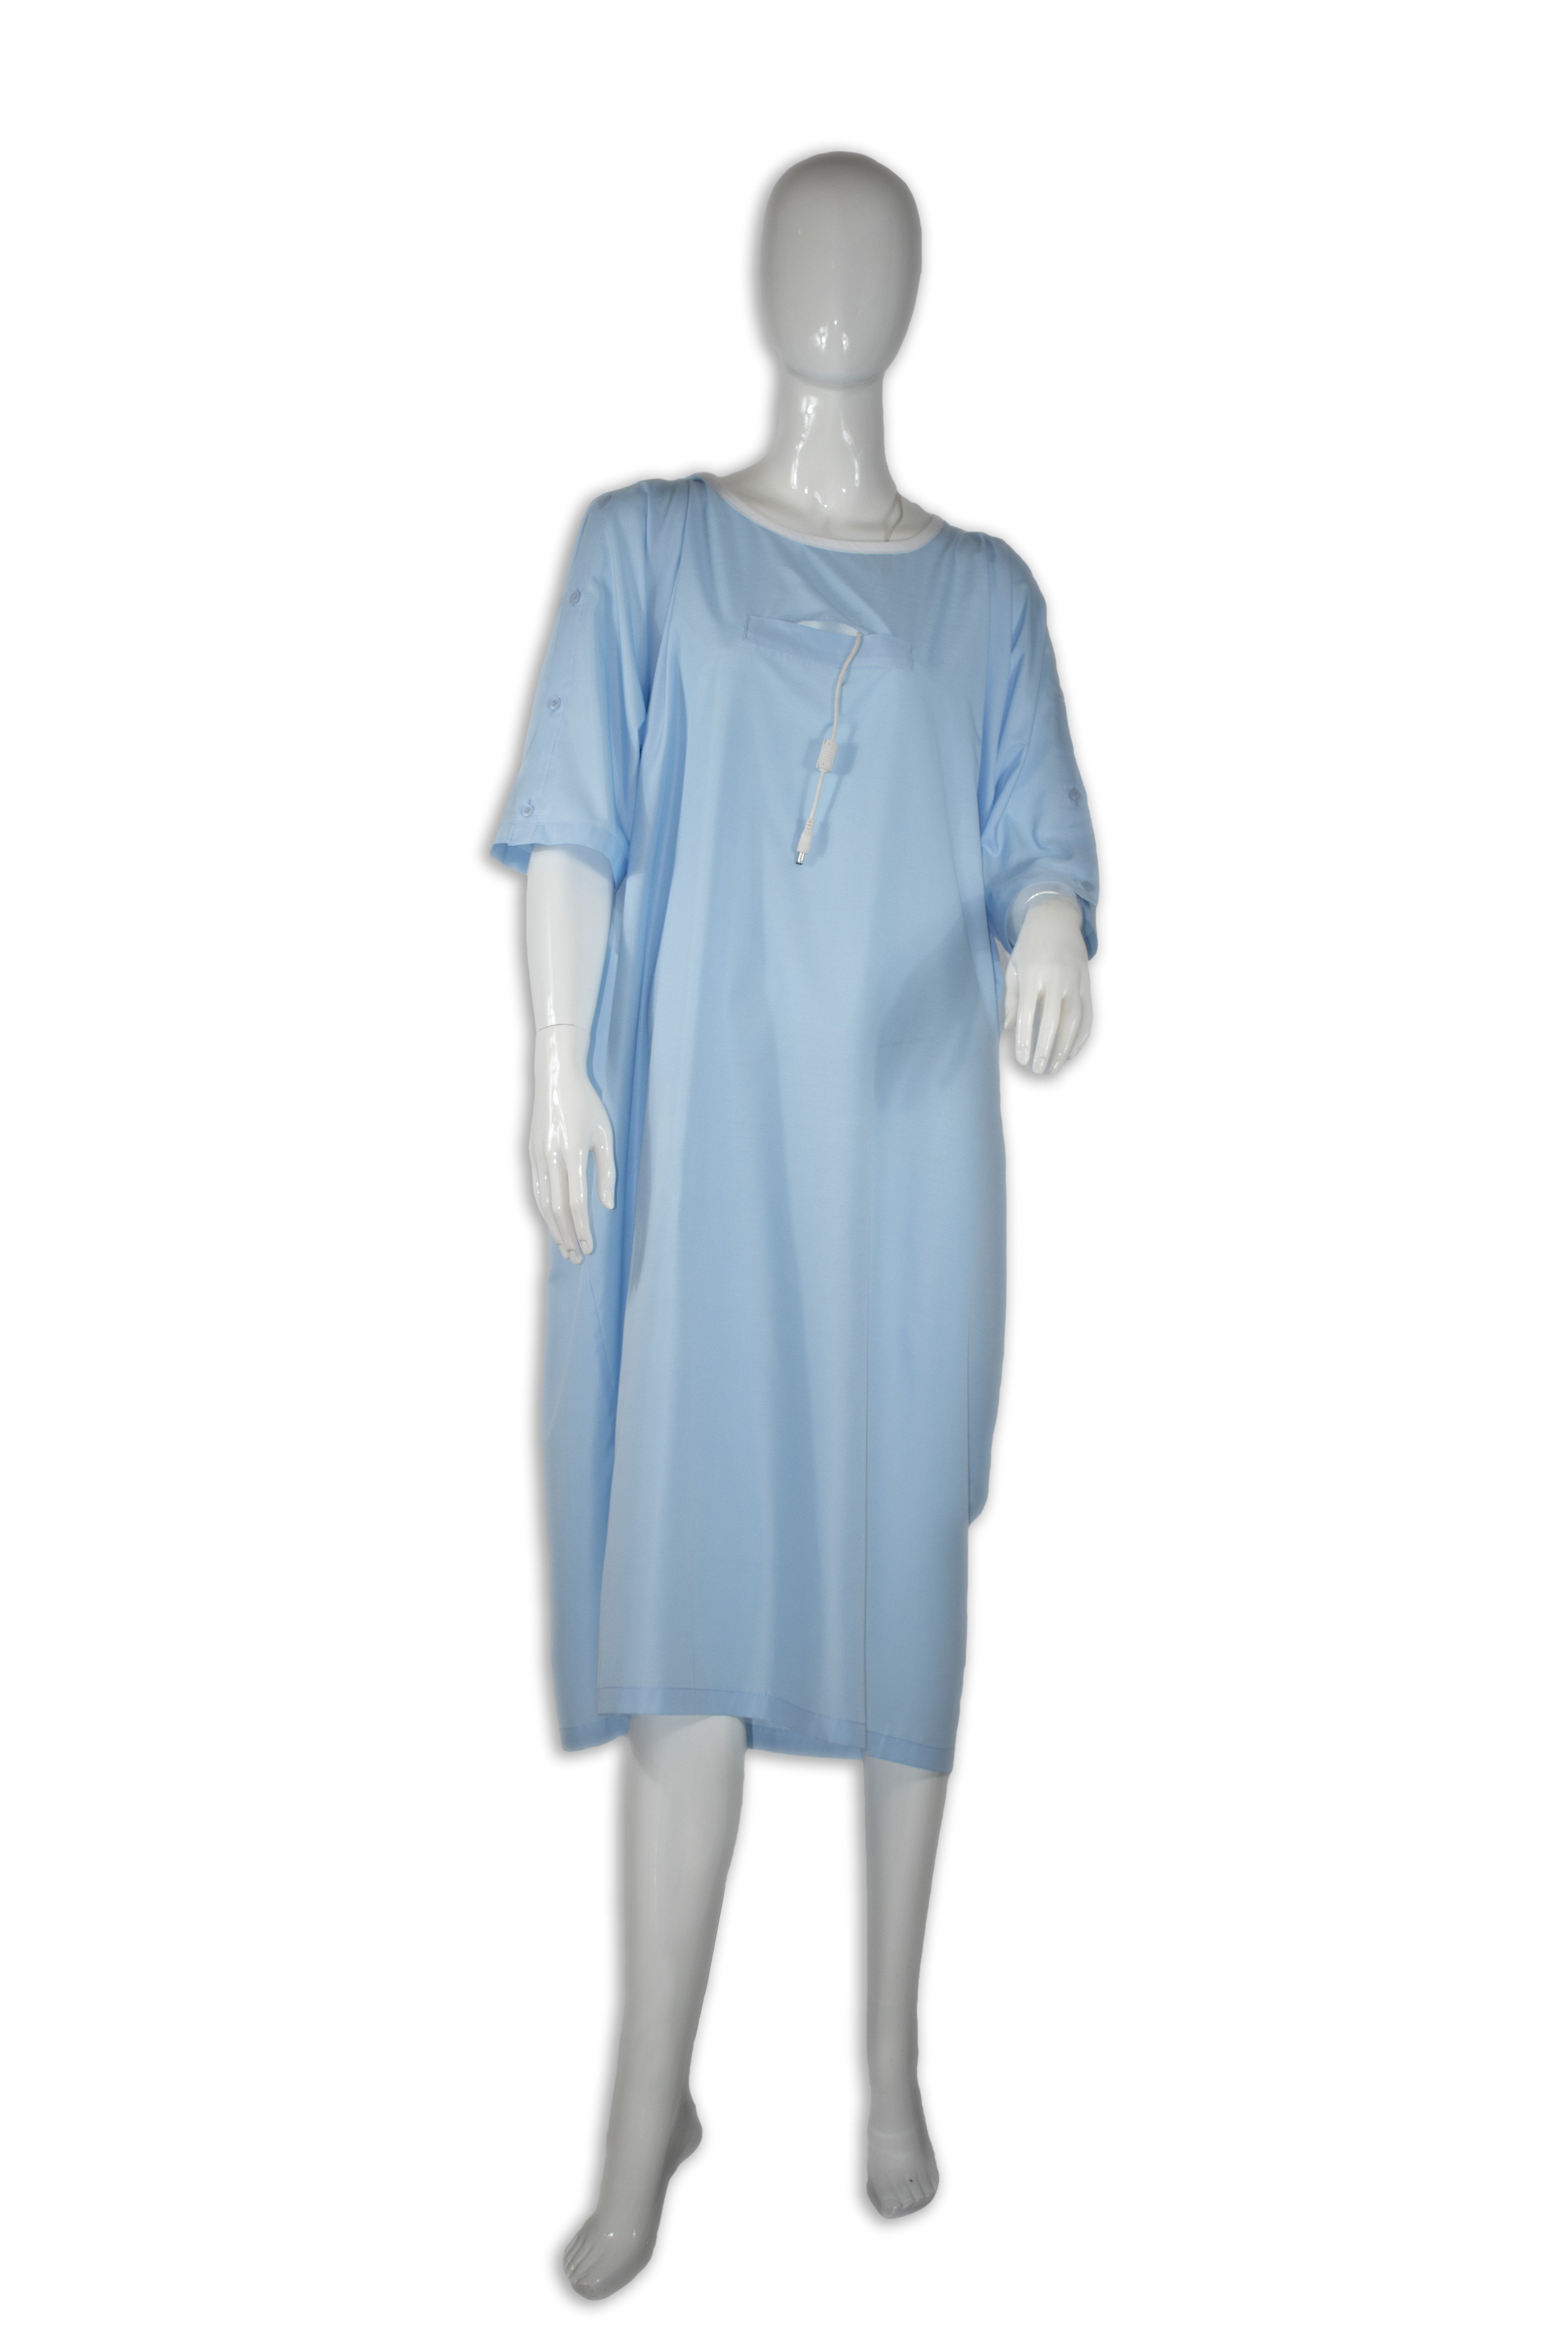 ICU:Telemetry Gown